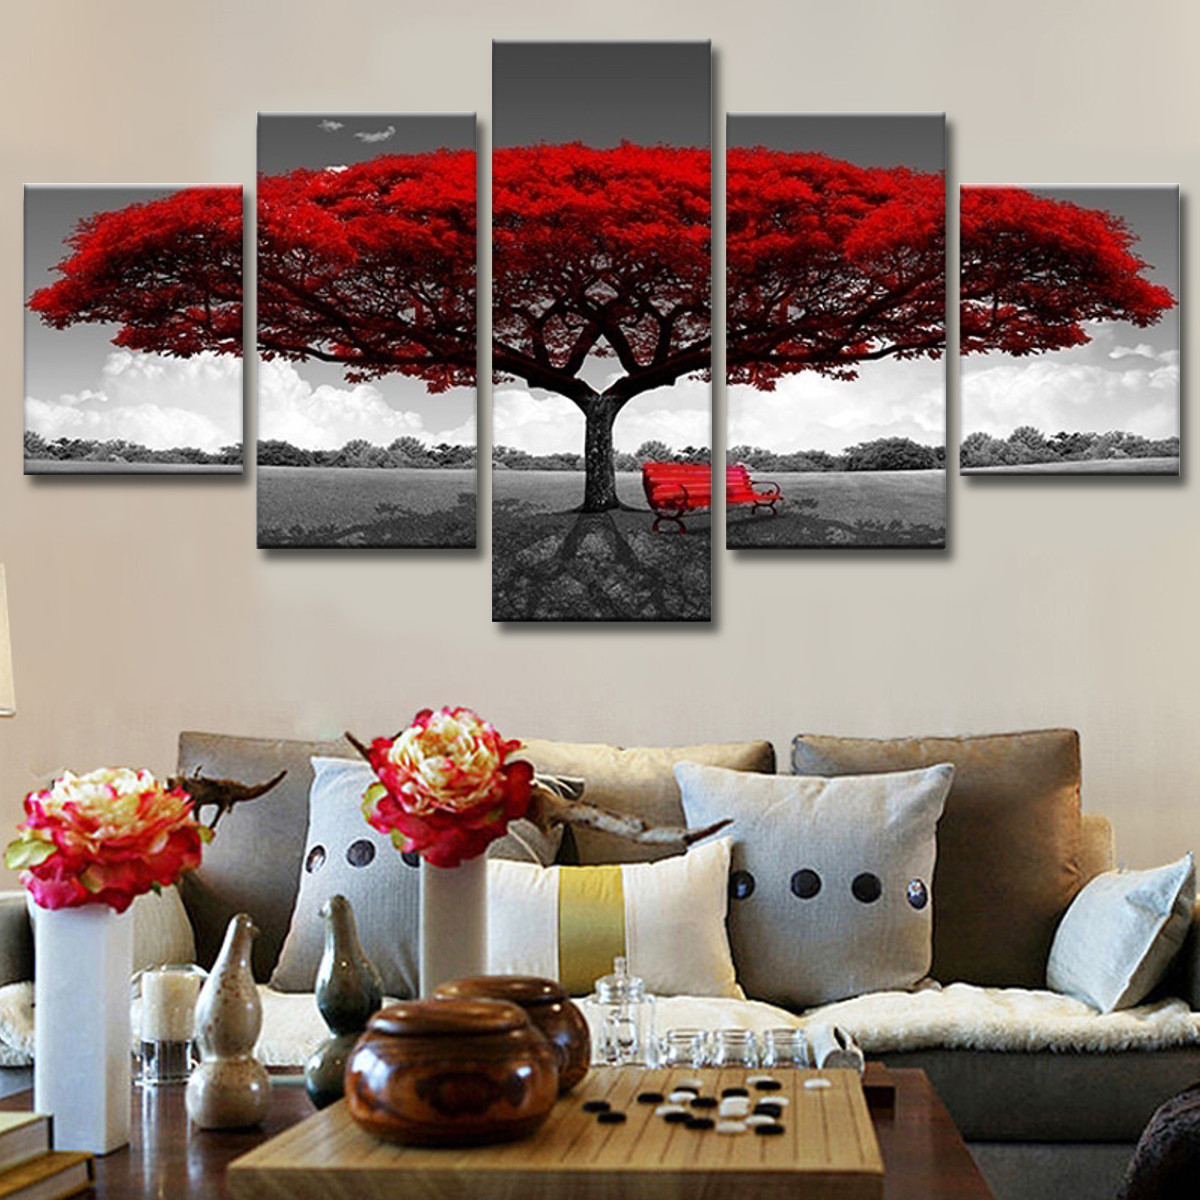 5Pcs-Red-Tree-Canvas-Paintings-Wall-Decorative-Print-Art-Pictures-Unframed-Wall-Hanging-Home-Office--1774551-5